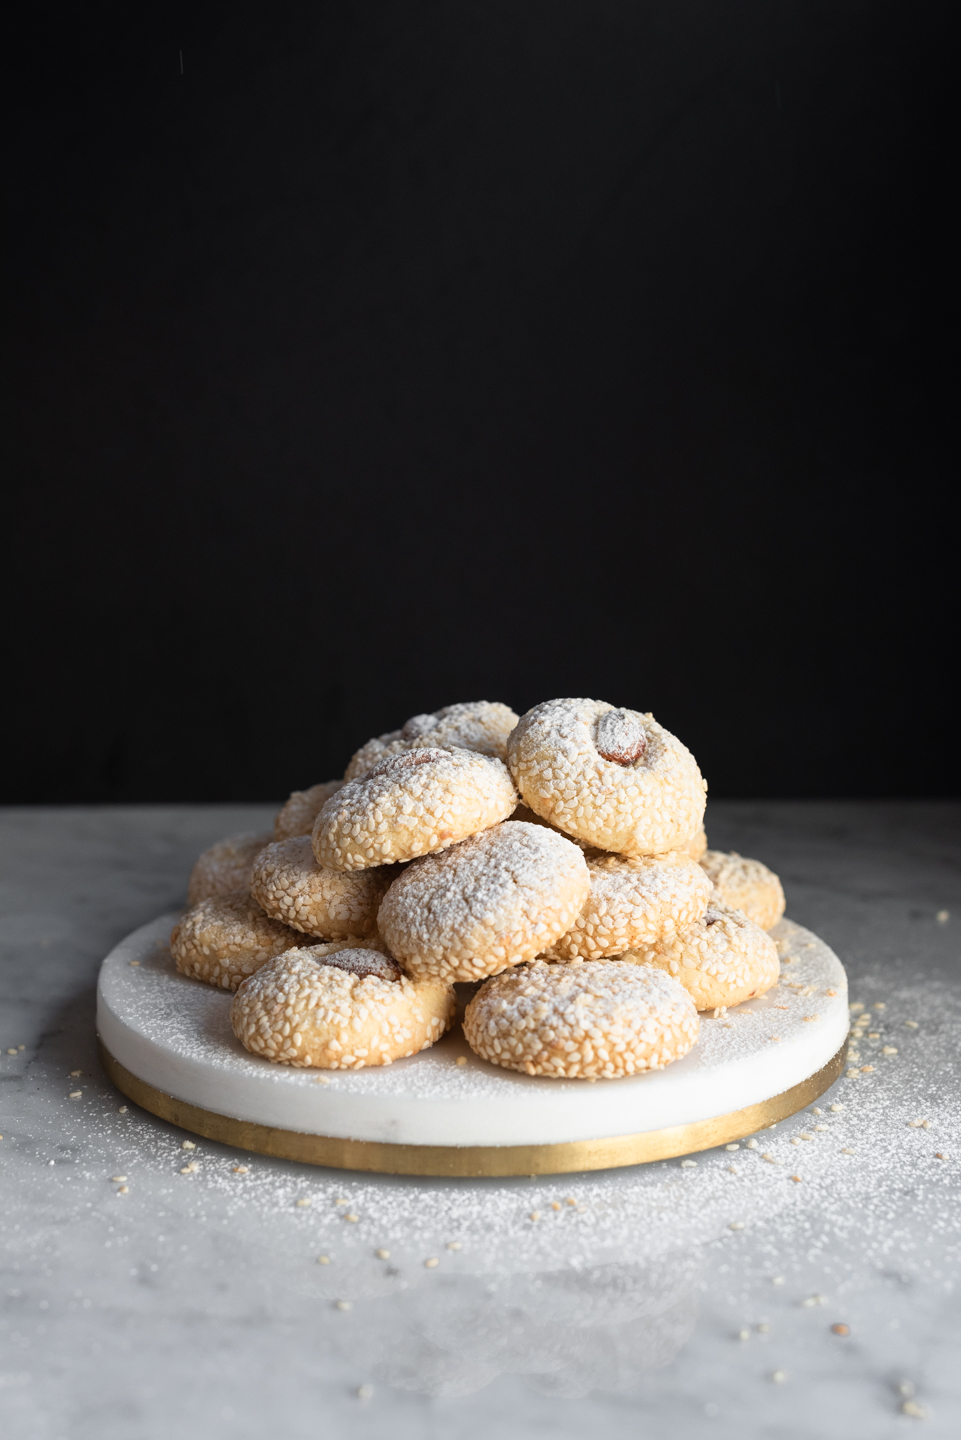 Almond and sesame shortbread rounds